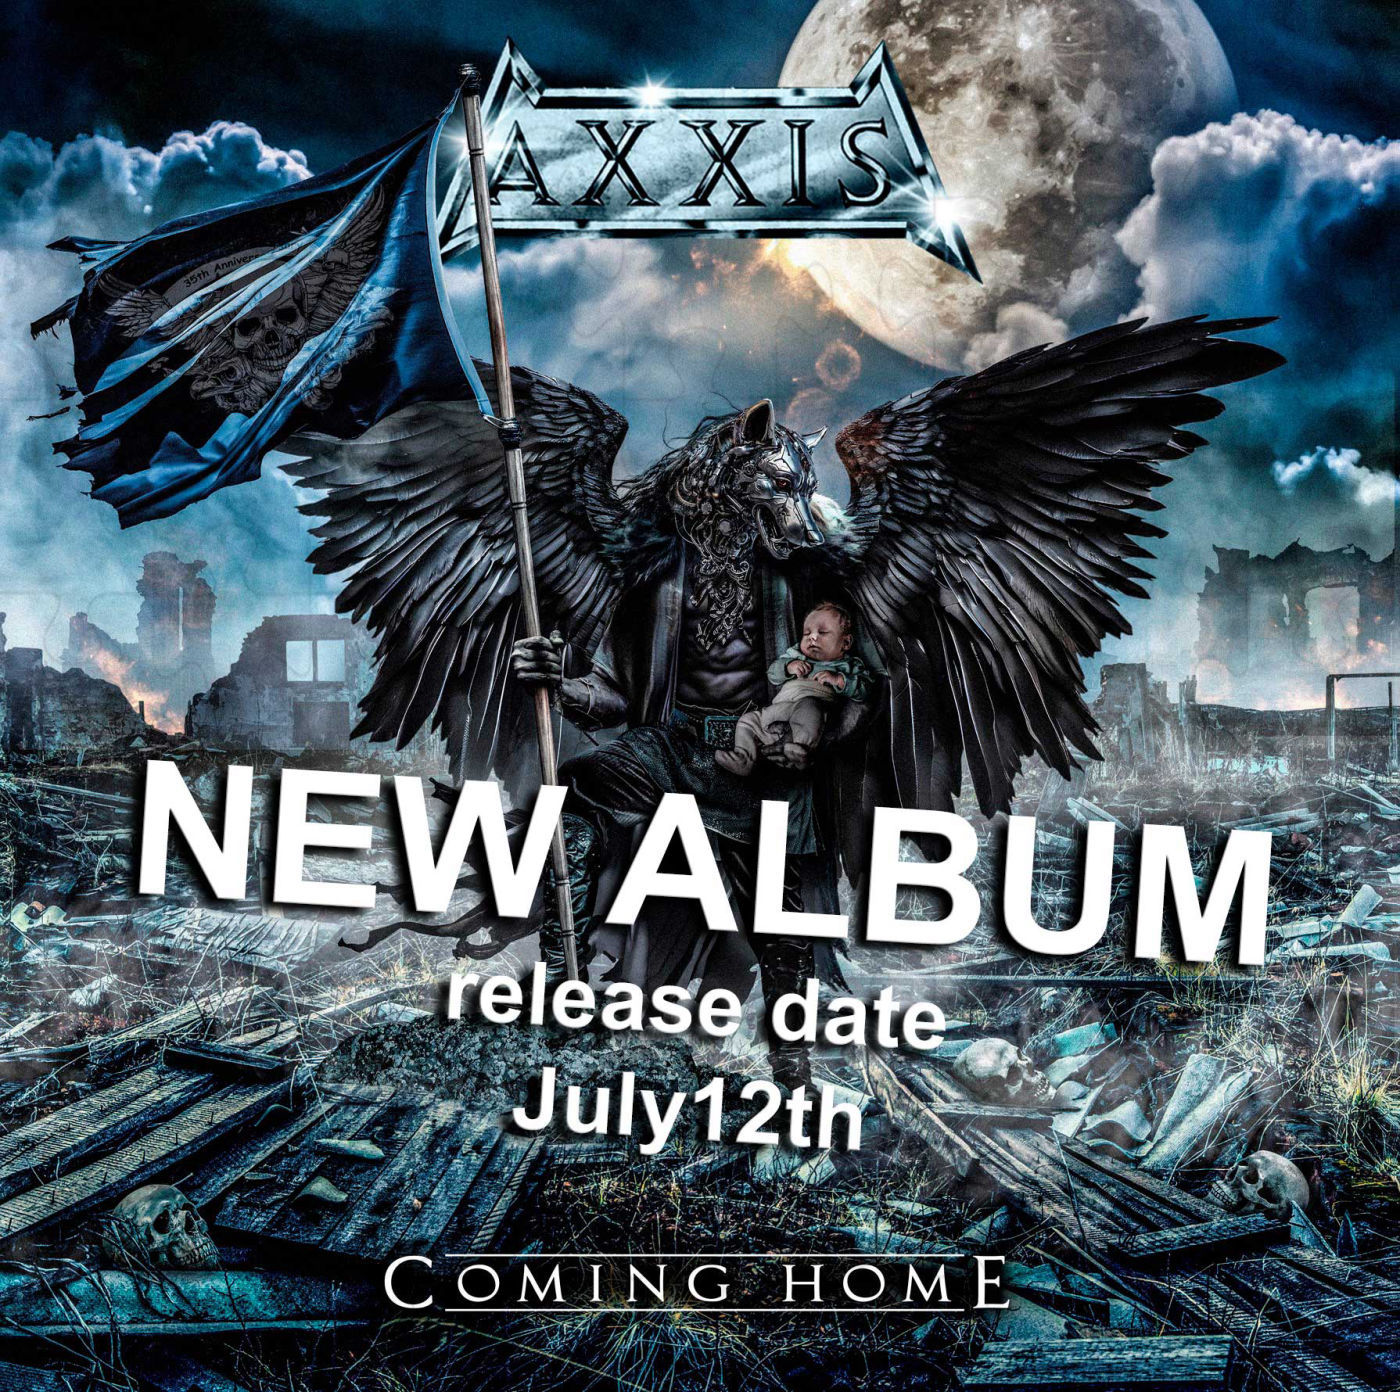 AXXIS Coming home